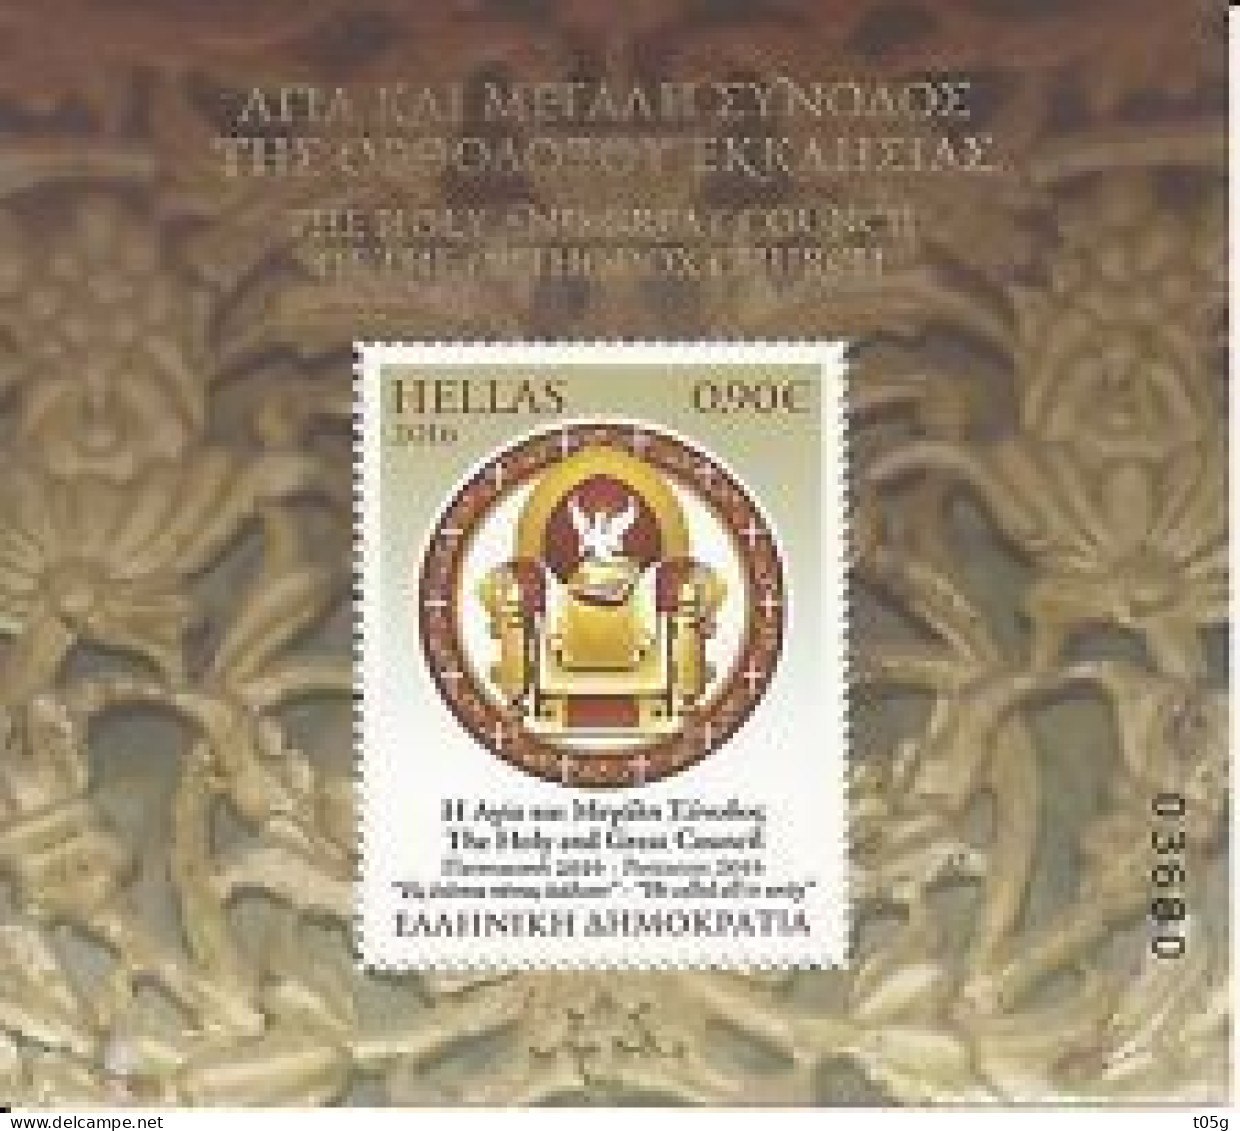 GREECE- GRECE -HELLAS 2016: ANNIVERSARIES & EVENTS/THE HOLY & GREAT COUNCIL OF THE ORTHODOX  CHURCH Set MNH** - Ungebraucht